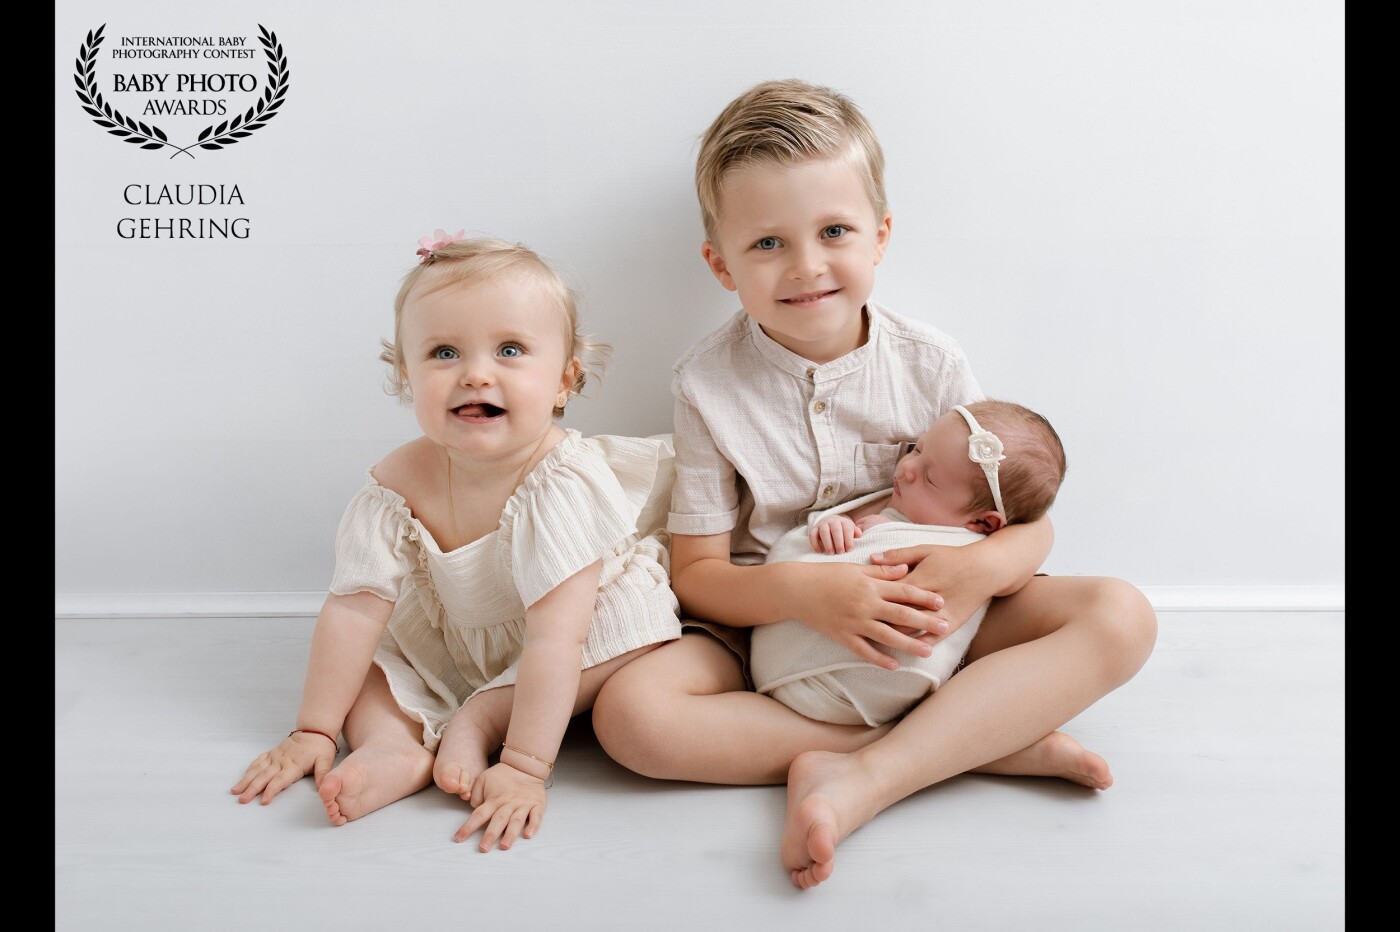 These three lovely siblings are just adorable. I was allowed to do the newborn shoot for all three children. It makes me very proud when my parents have such confidence in me and appreciate my work so much.